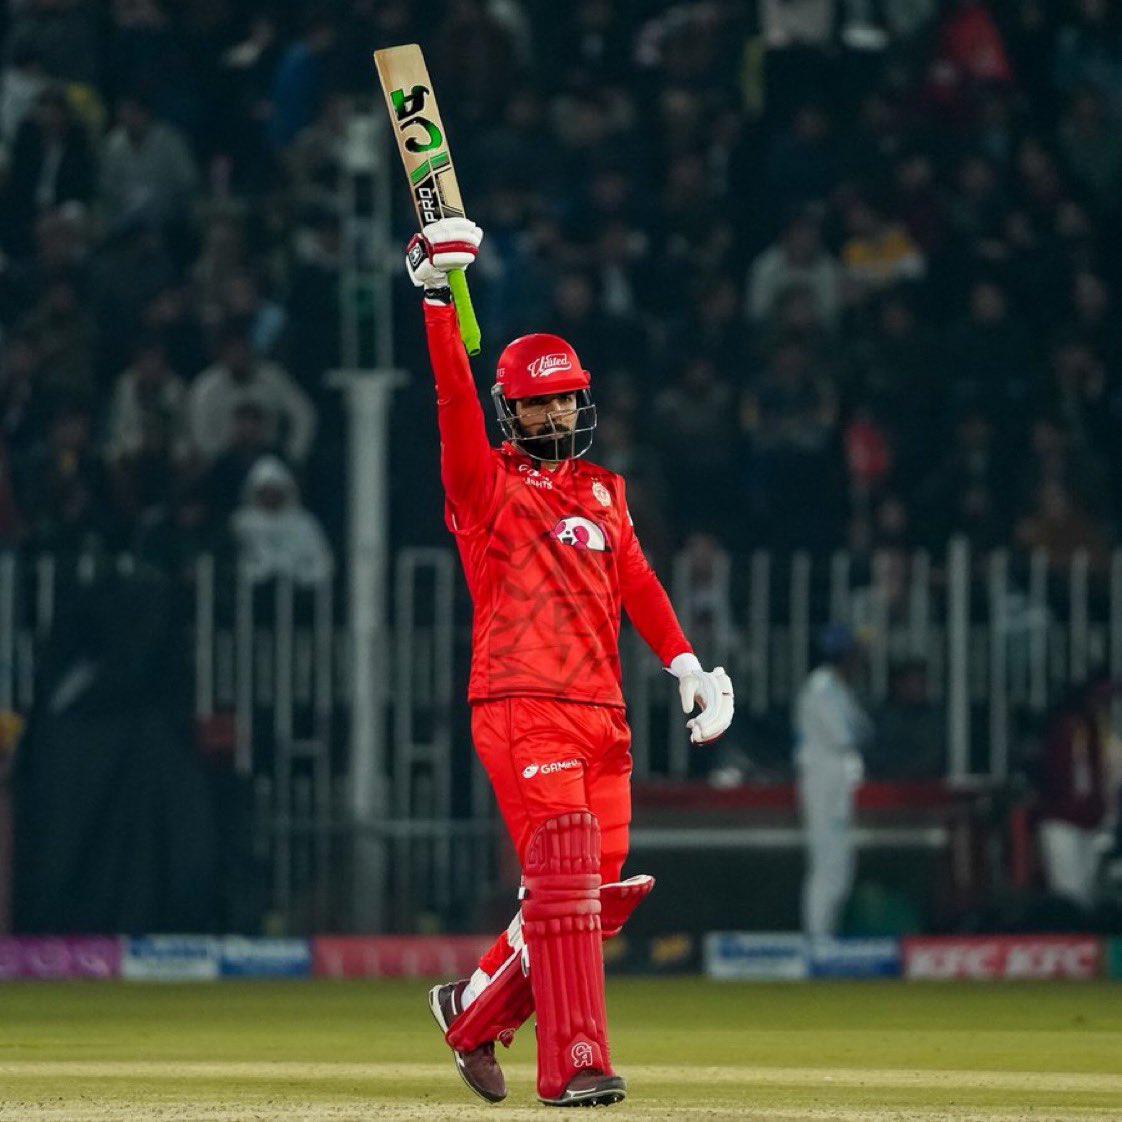 Finally its time to celebrate for United fans ❤️🔥 but brilliat knock by young Aamir JAmal 🫶 #PSLSeason9 #IUvsPZ